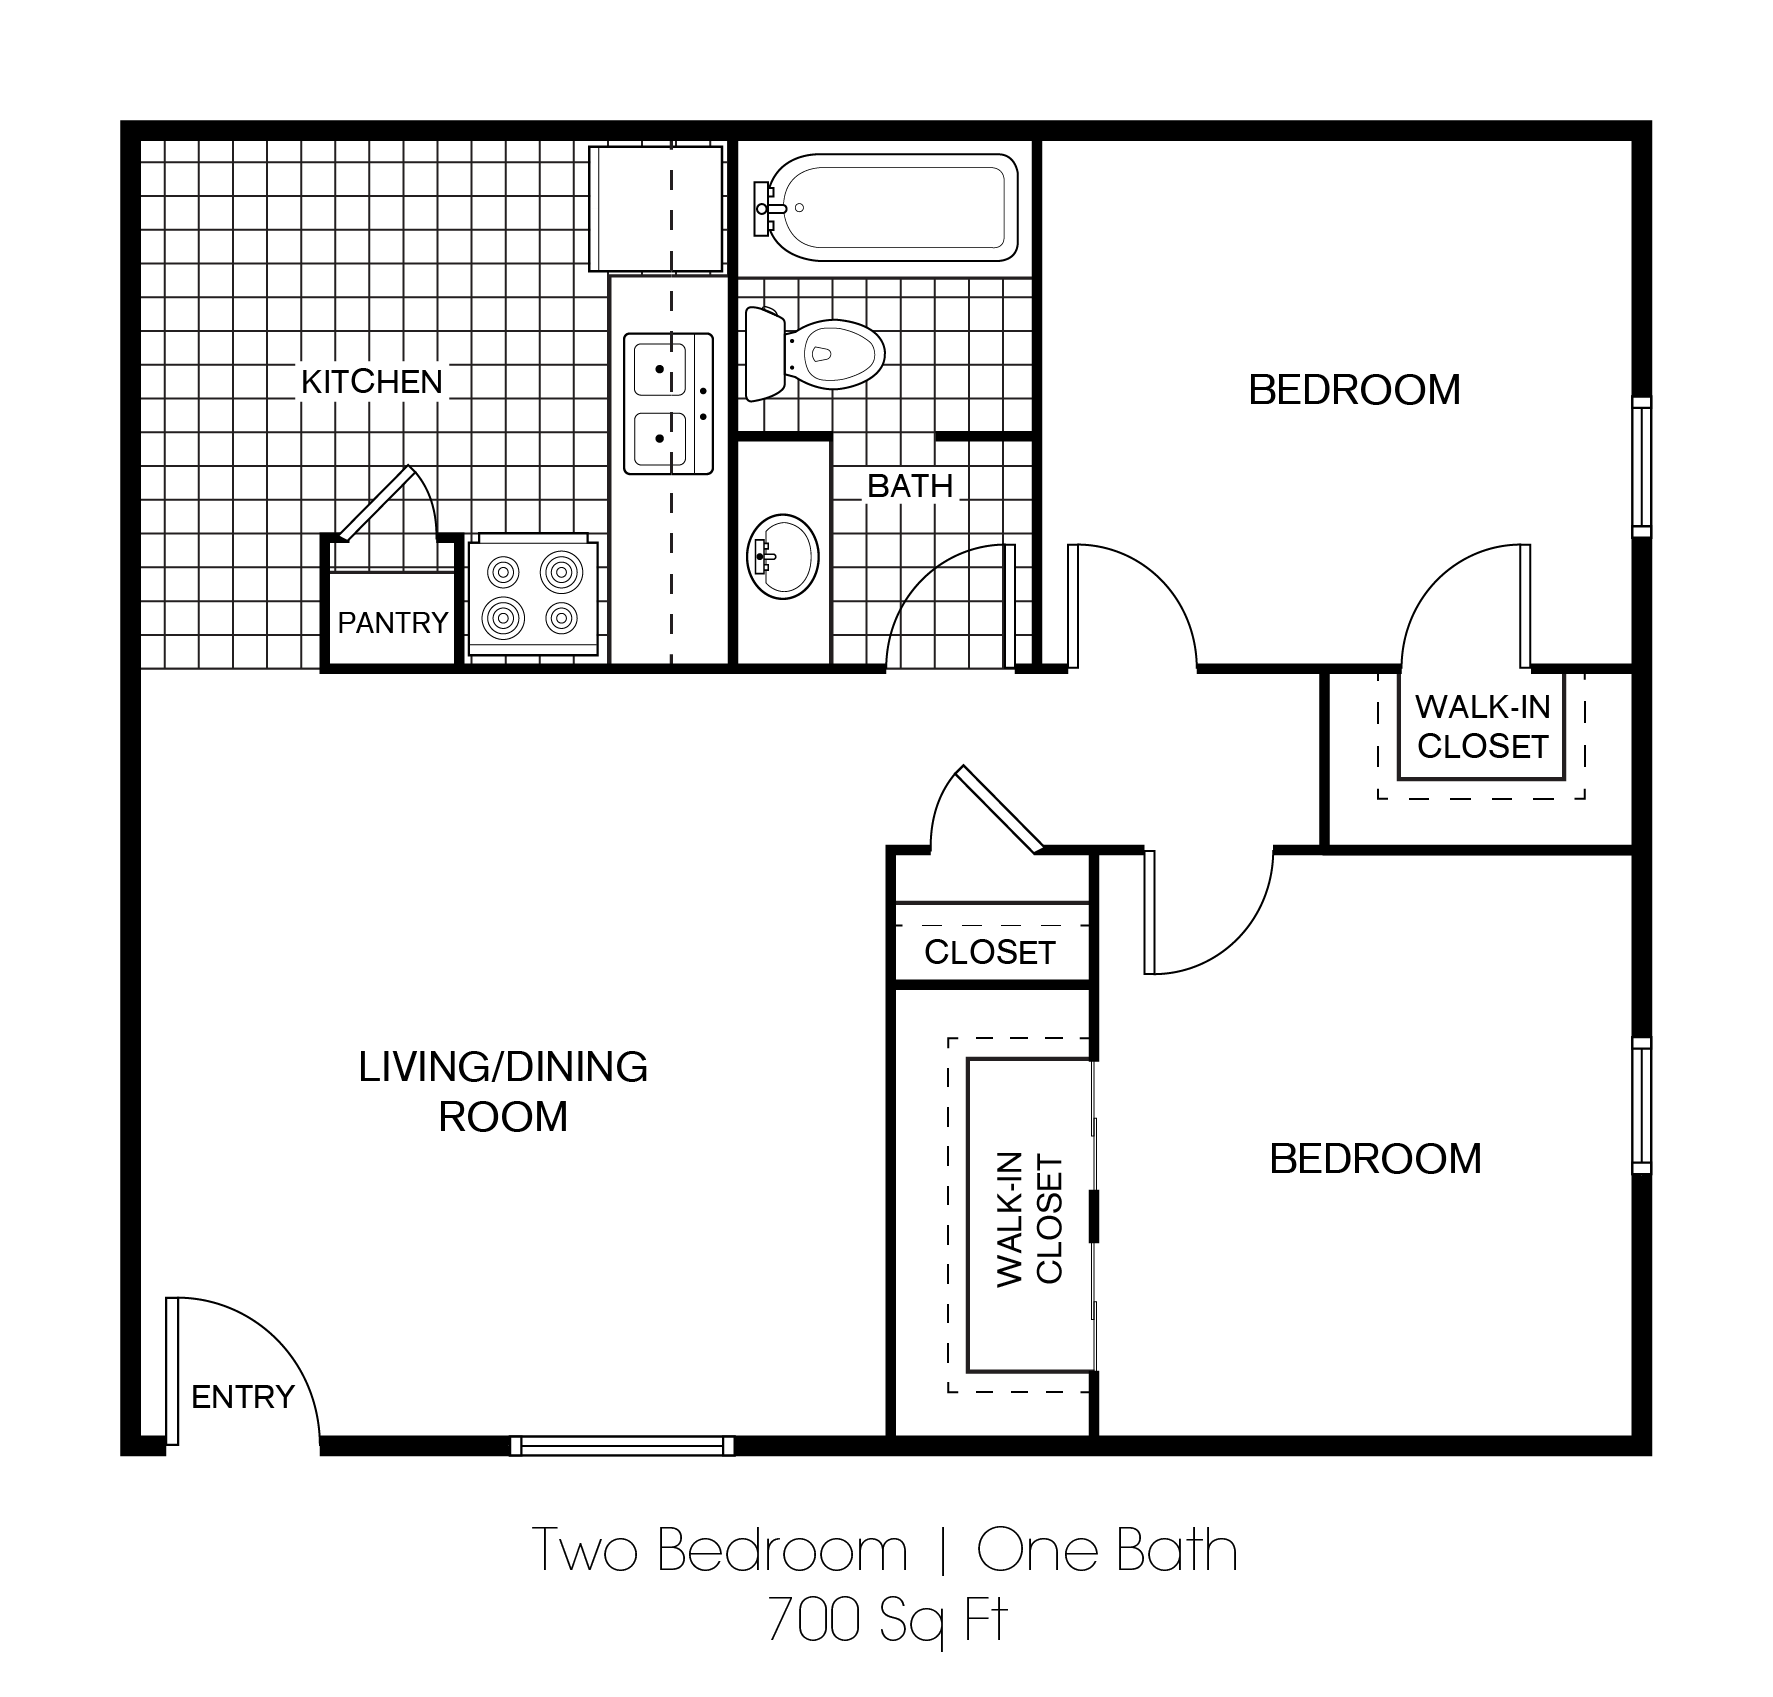 A B1 unit with 2 Bedrooms and 1 Bathrooms with area of 700 sq. ft